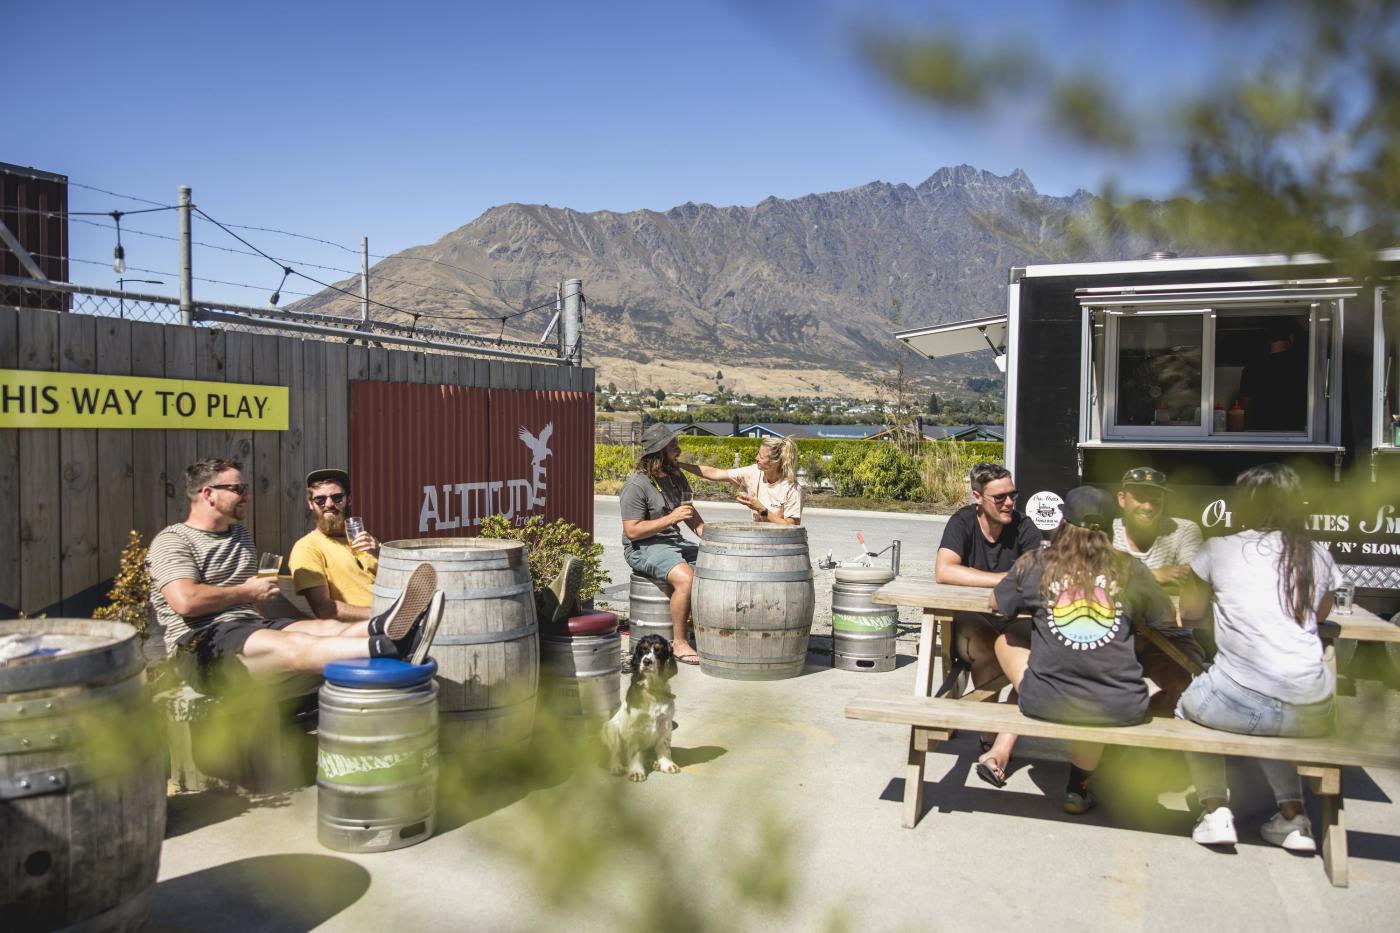 People sitting in the outdoor beer garden at Altitude Brewing with the Remarkables mountains in the background